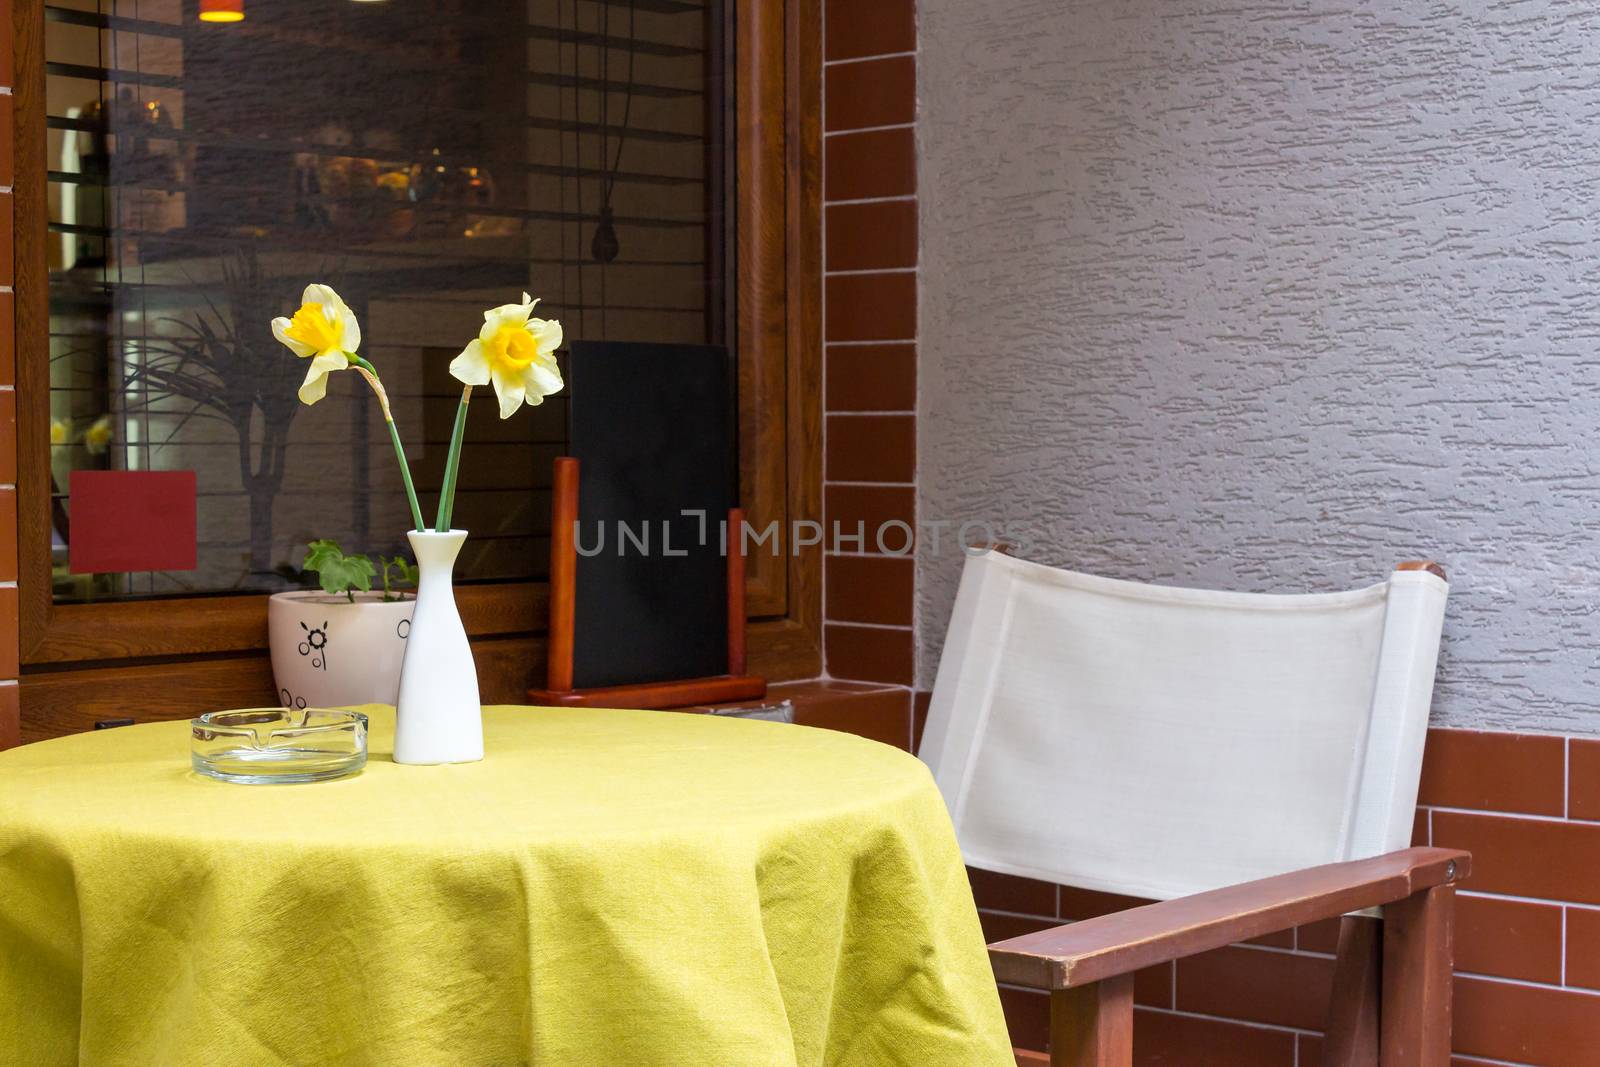 Two narcissus flower in a vase on a table in a cafe near the window